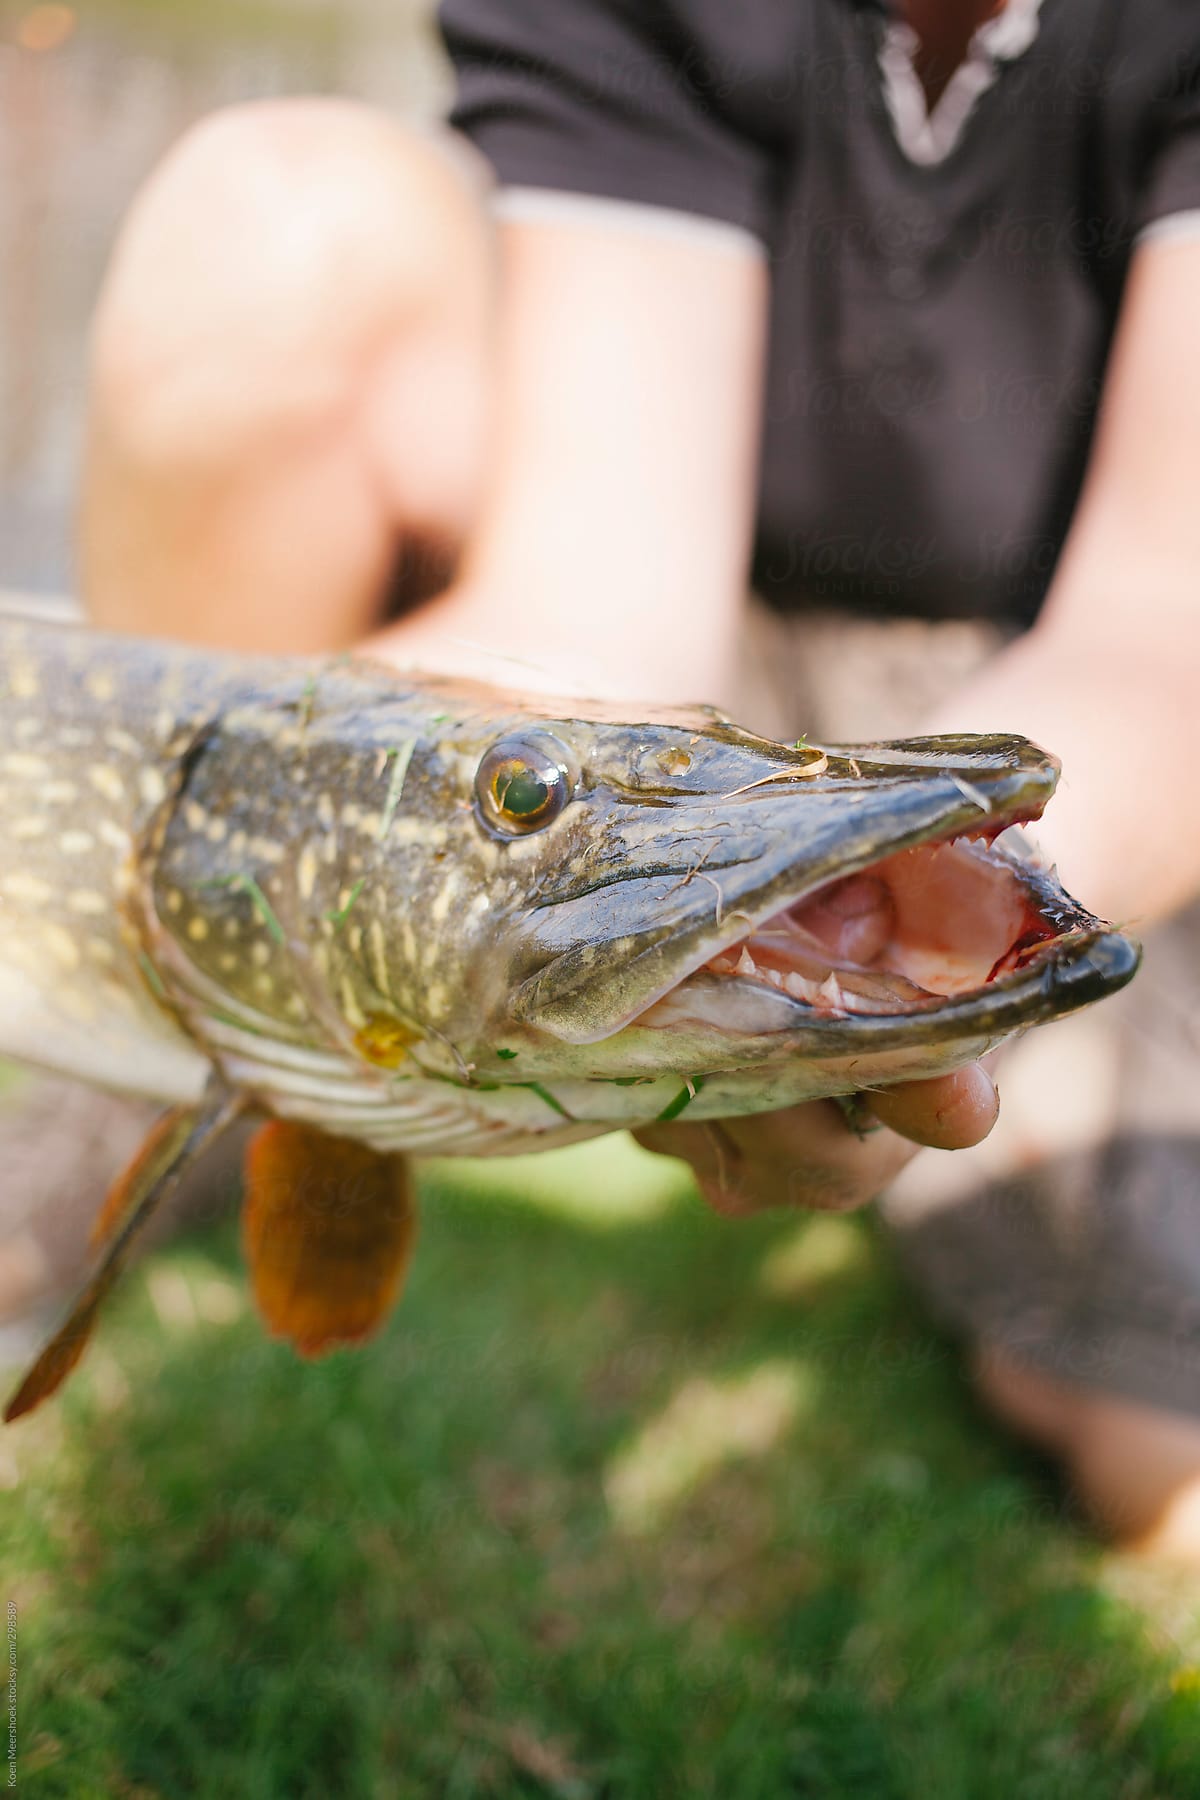 Fisher holding a pike in the gill grip.